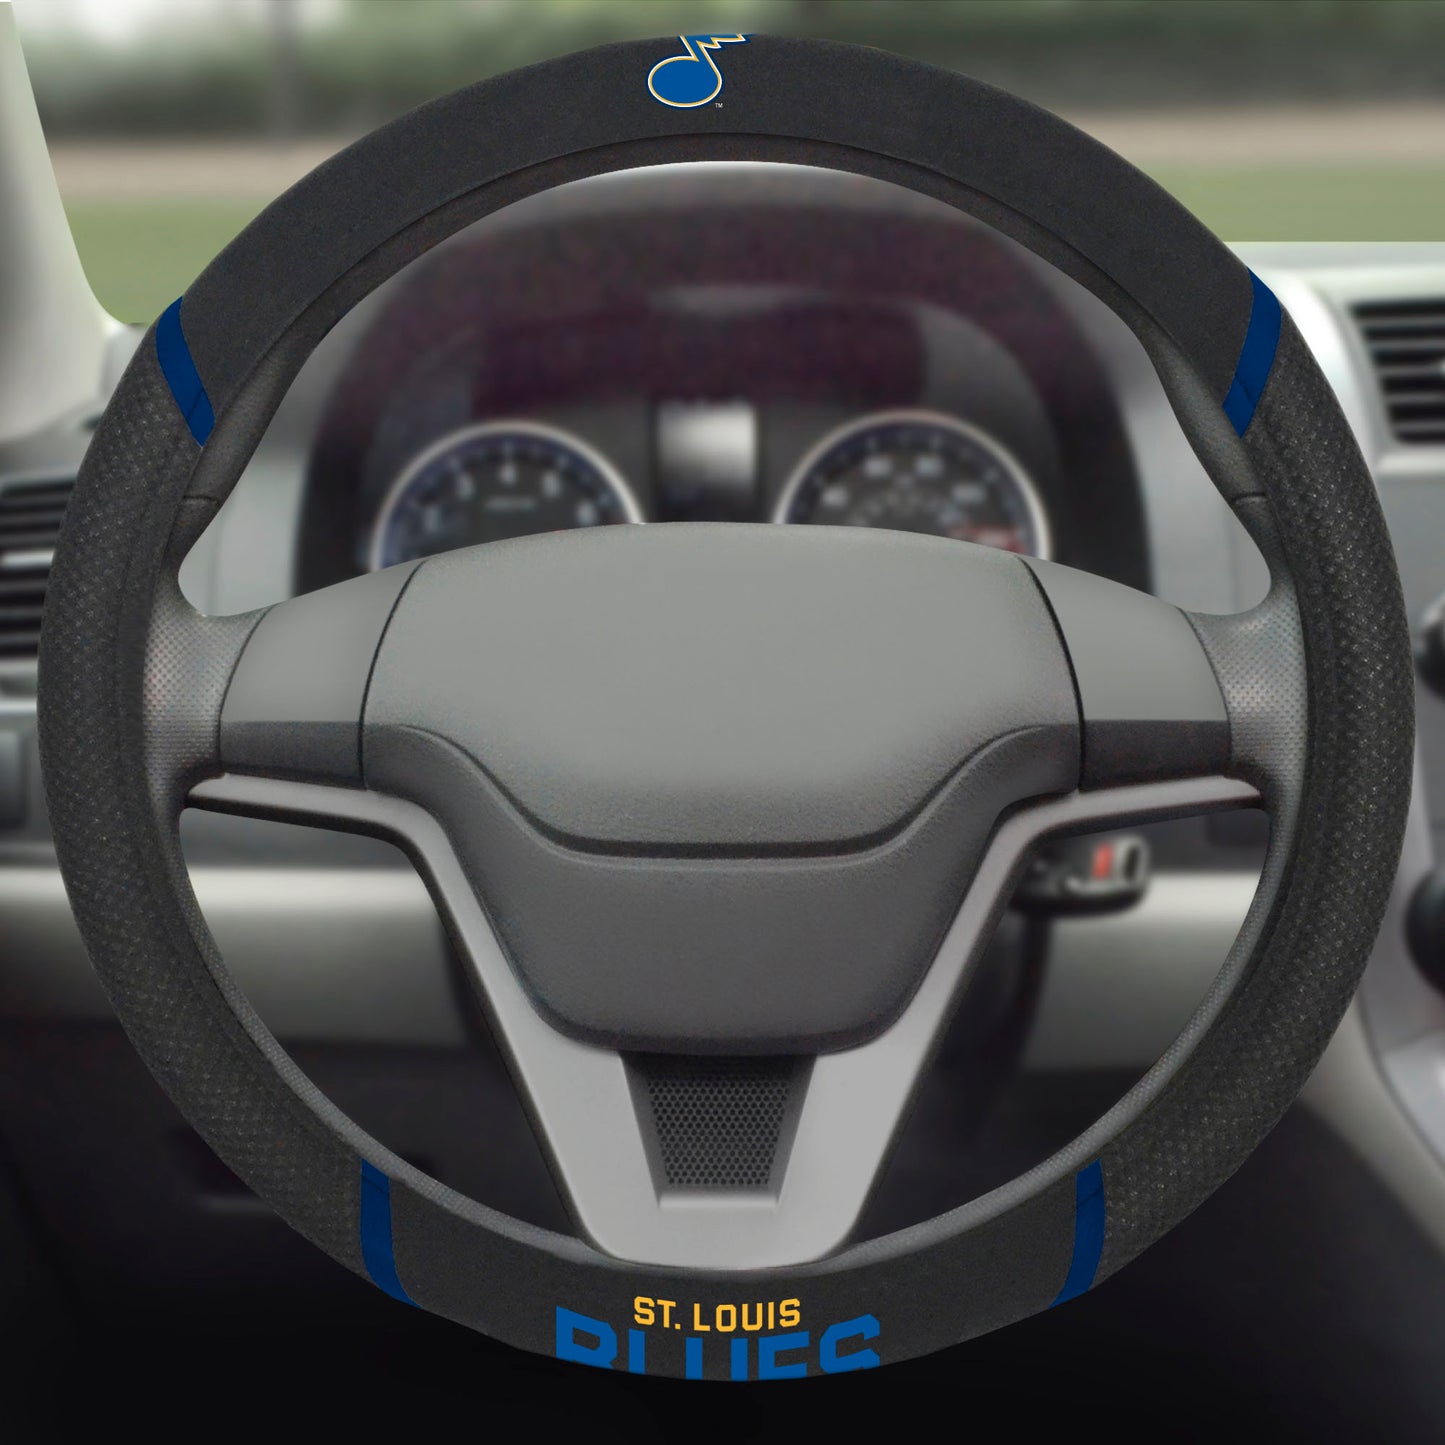 St. Louis Blues Embroidered Steering Wheel Cover